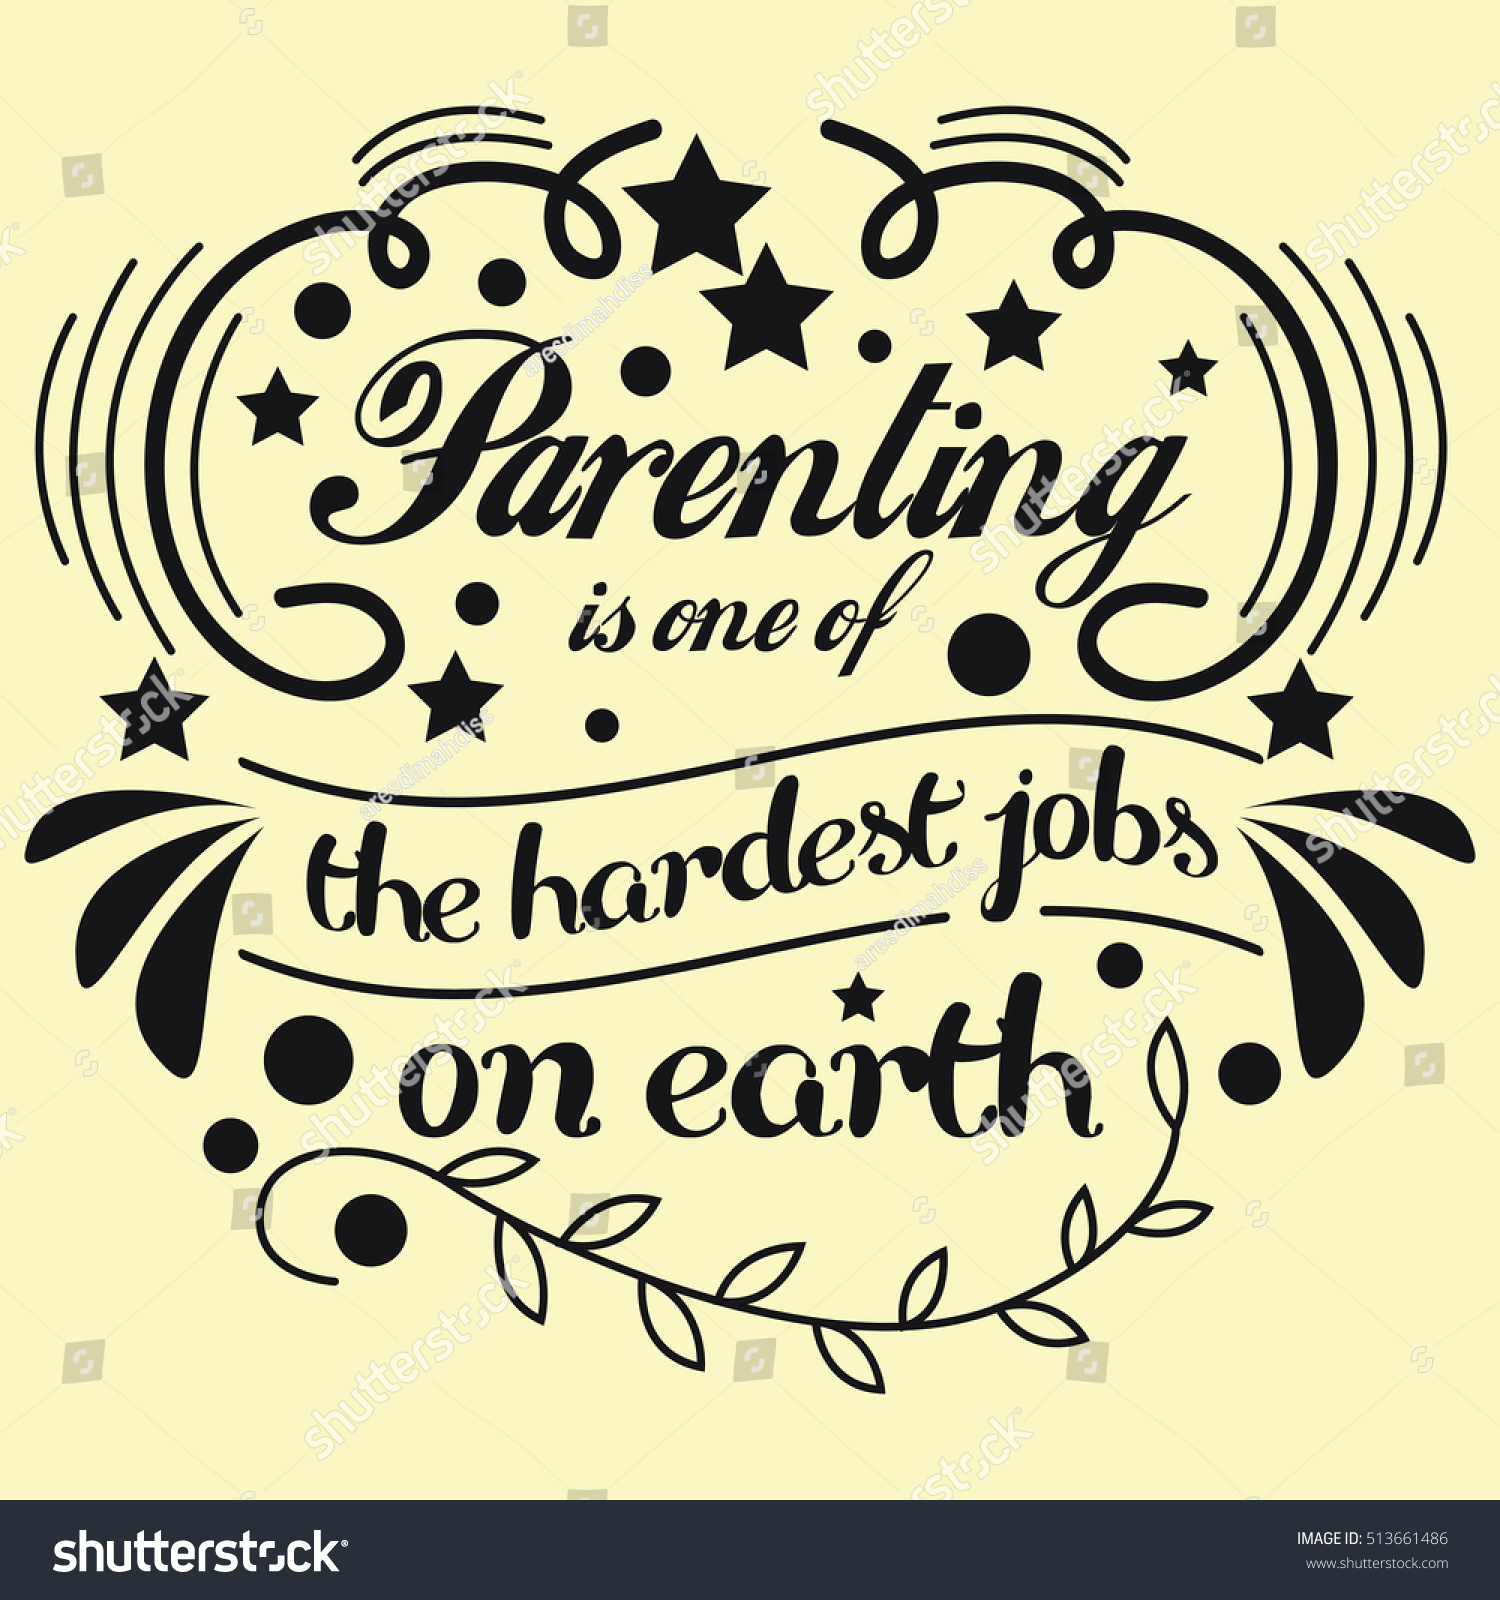 Download Parenting, Family Values, Inspirational Quotes Stock ...